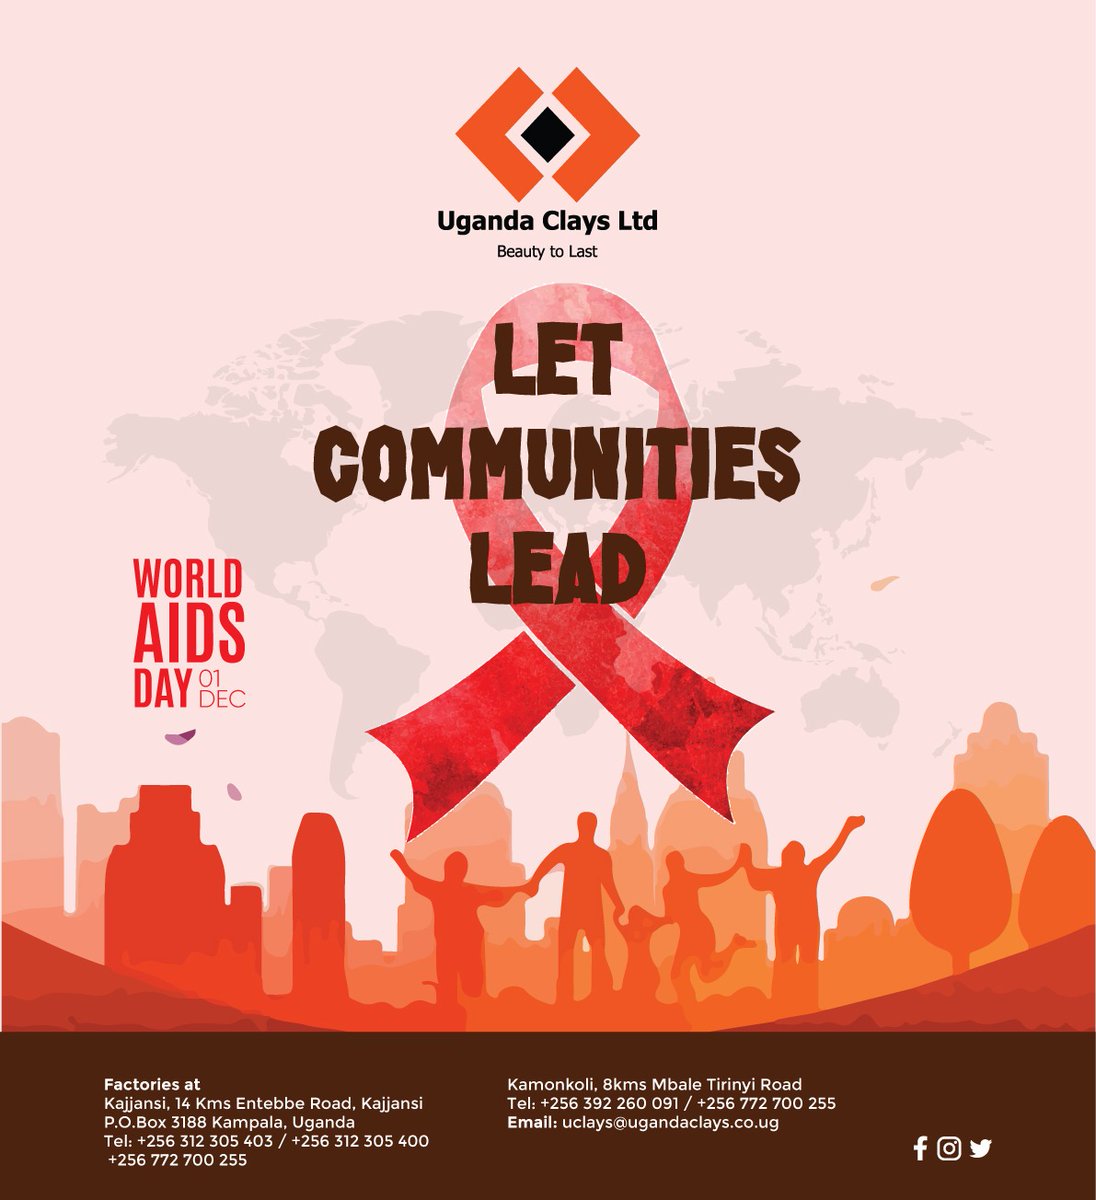 As UCL community, we join the whole world to commemorate this day, we stand together in fighting stigma associated with AIDs, and increase awareness now for a better health tomorrow.